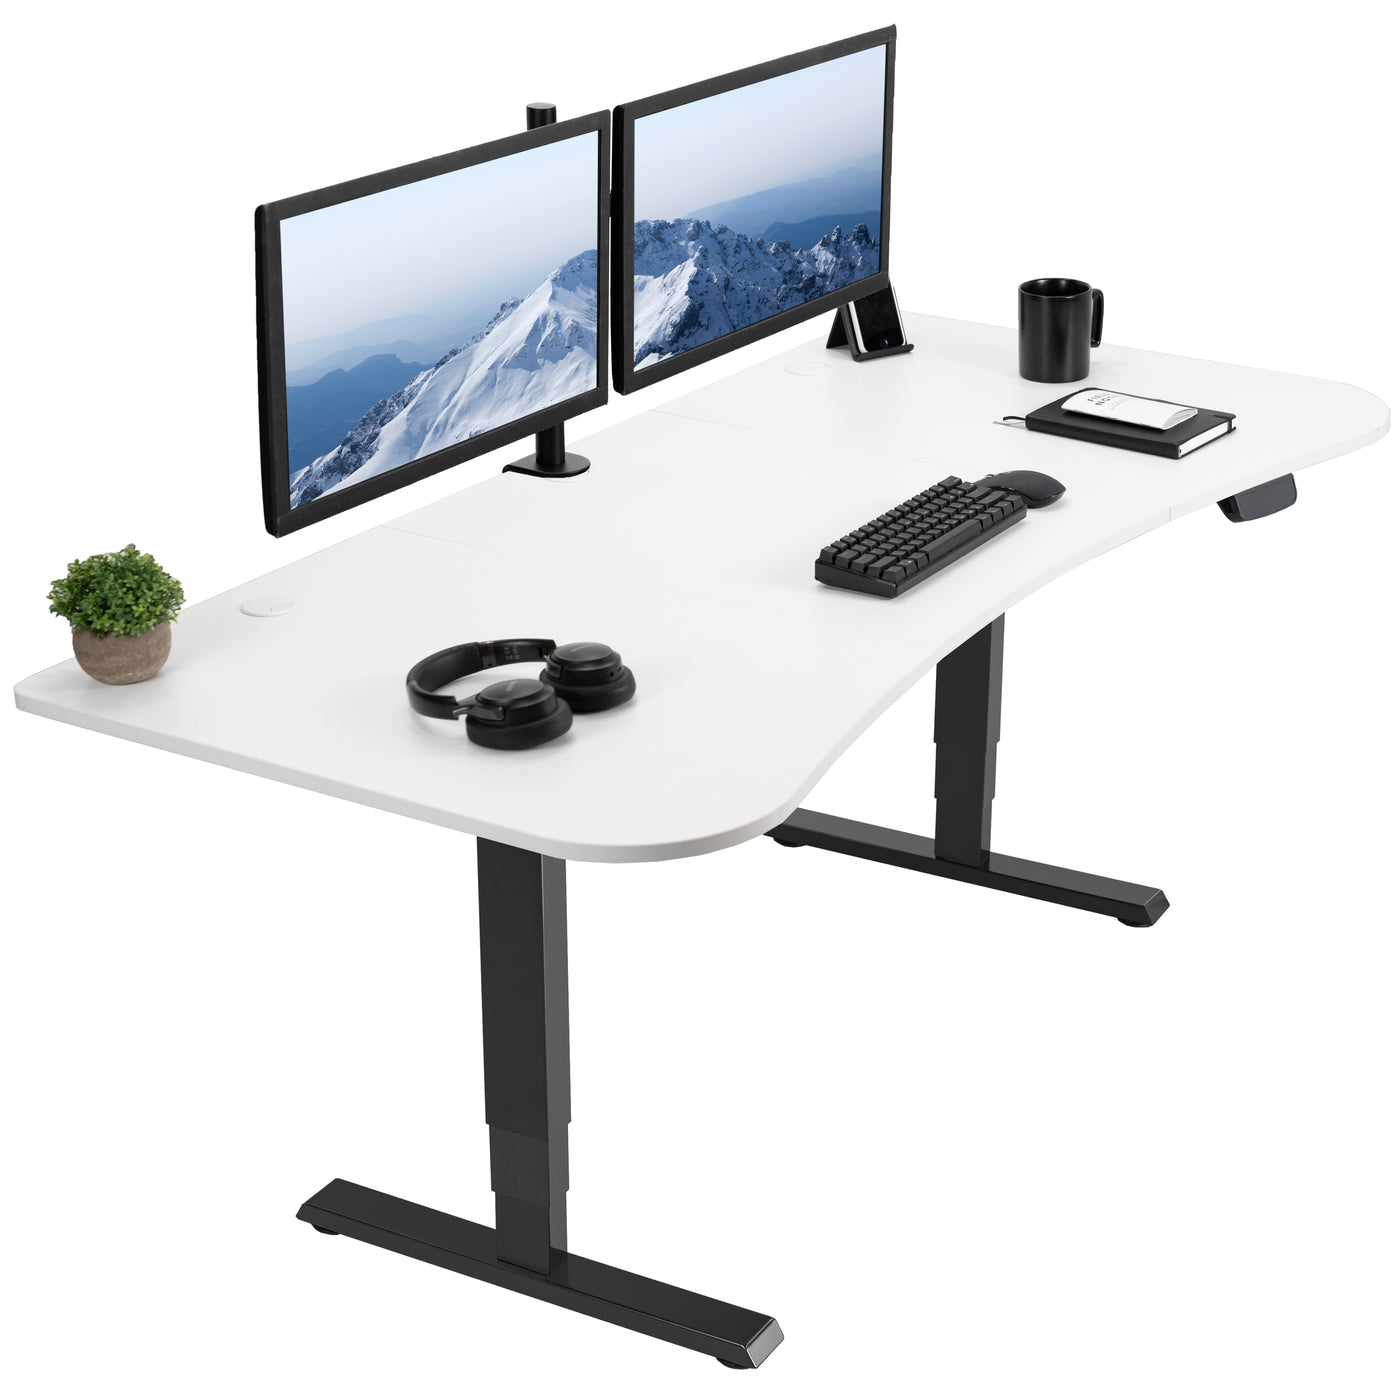 Sturdy sit or stand desktop workstation with adjustable height and wide tabletop surface.